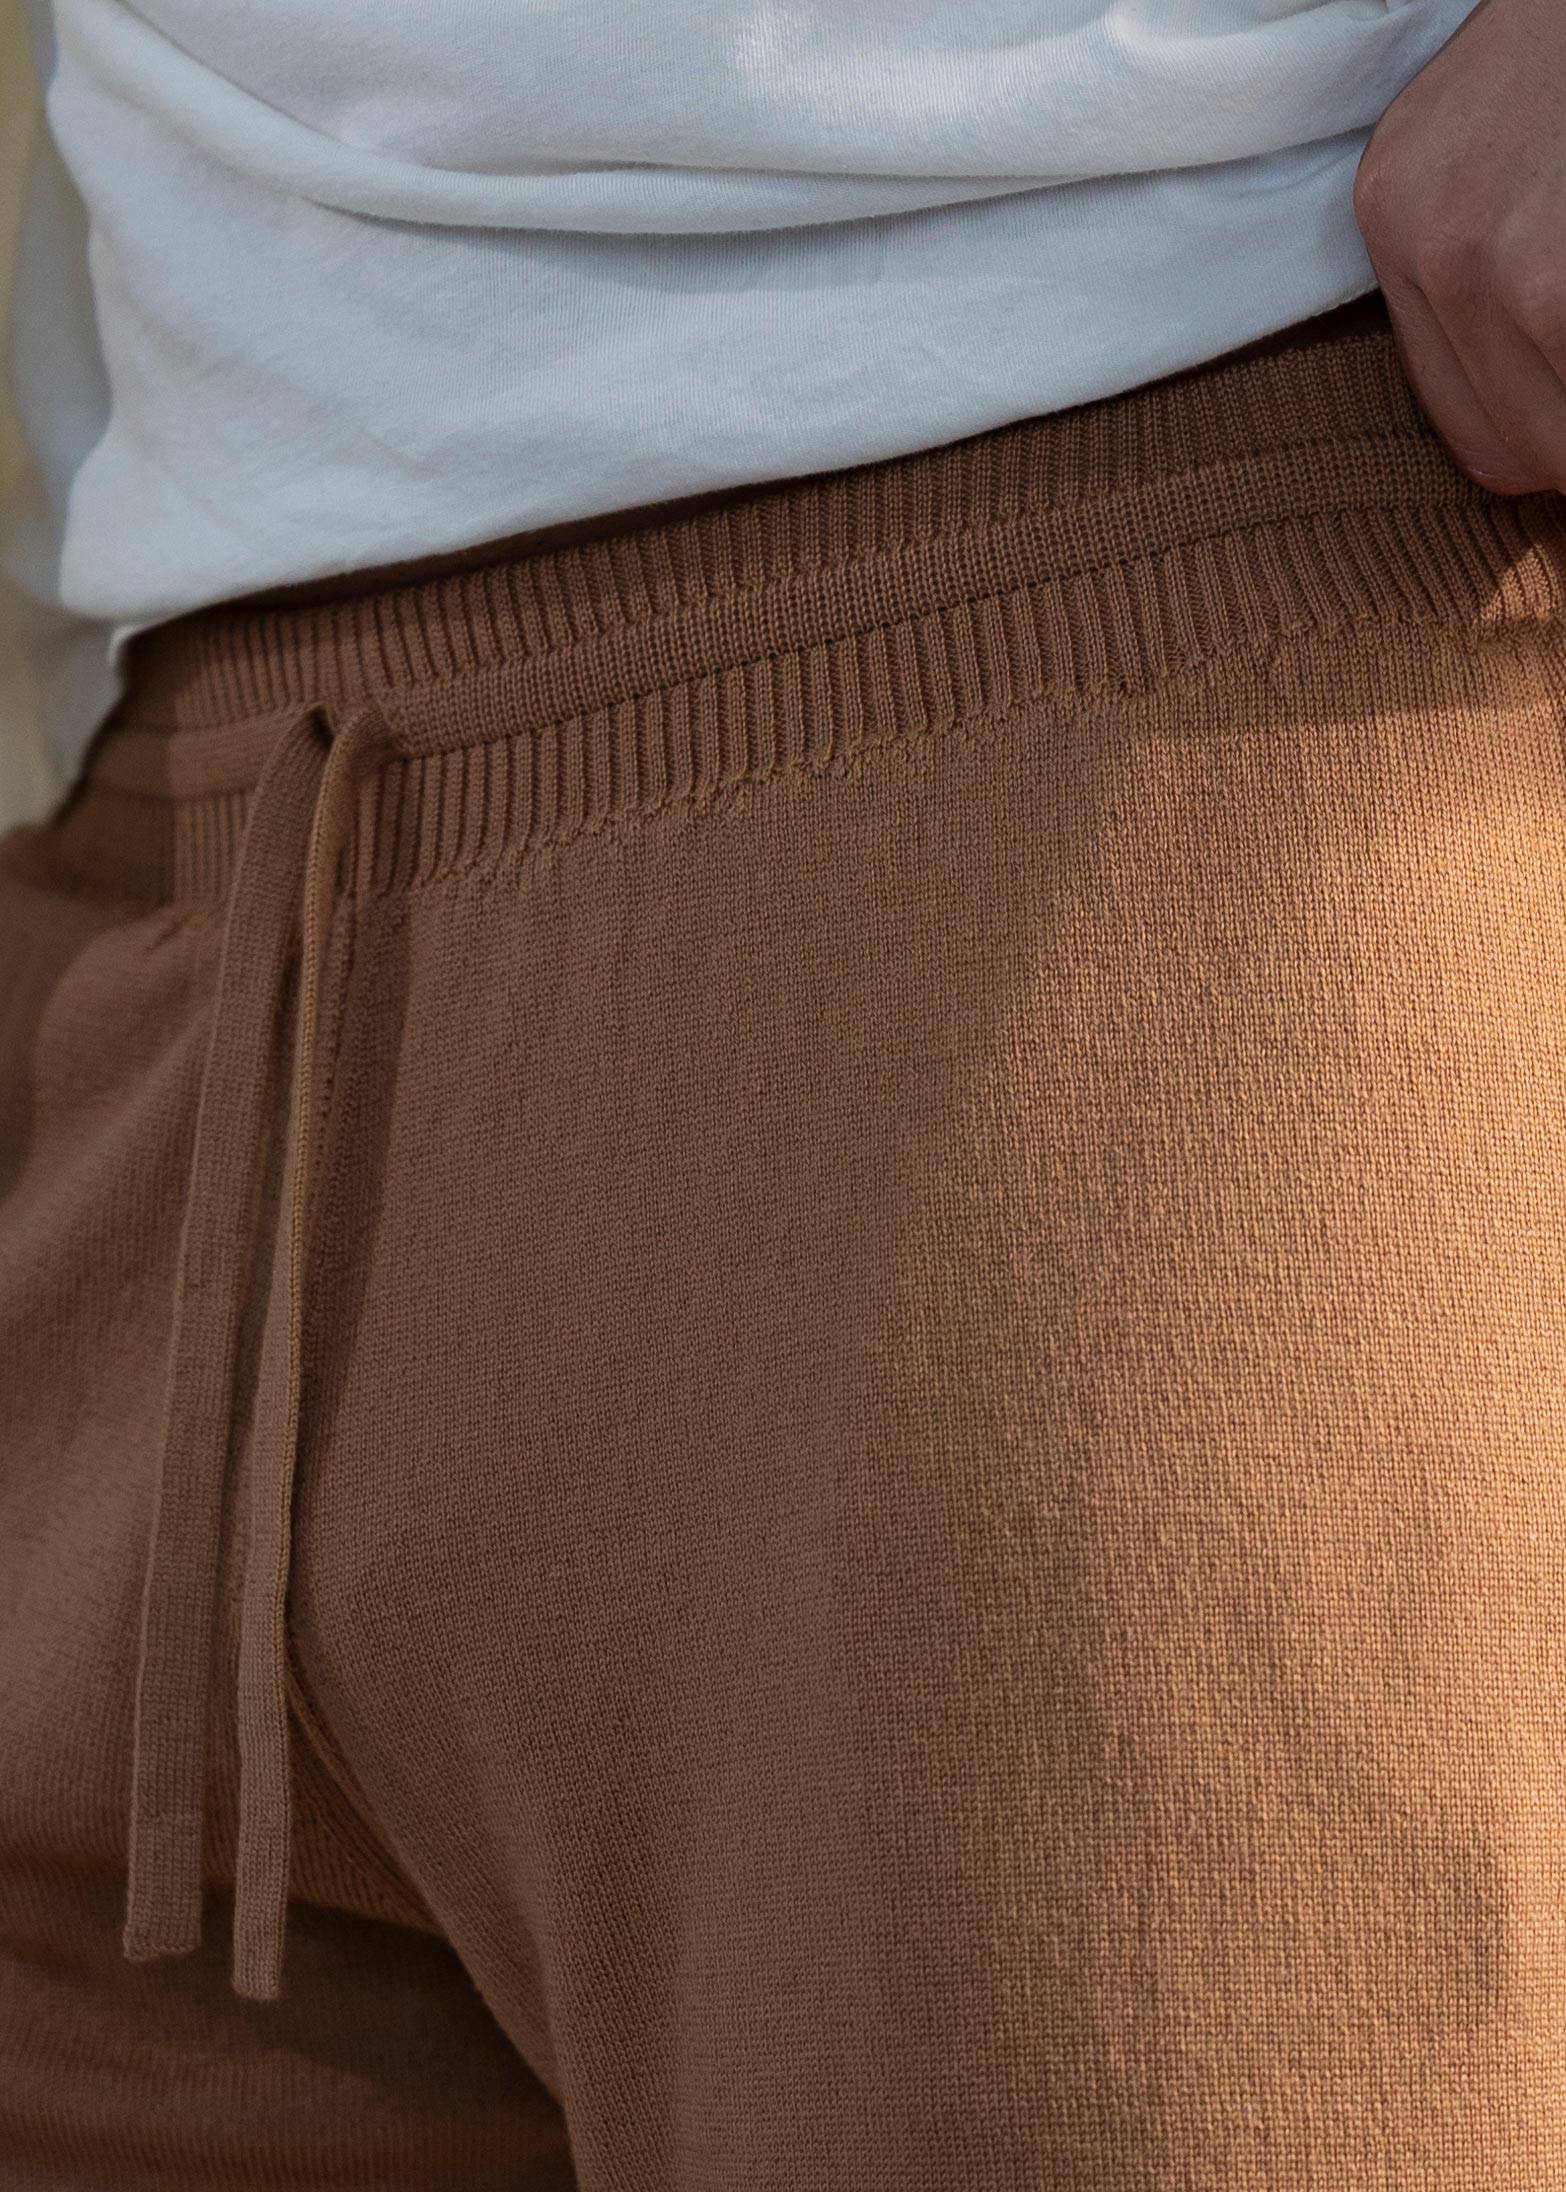 Sycamore Luxury Lounging Pants